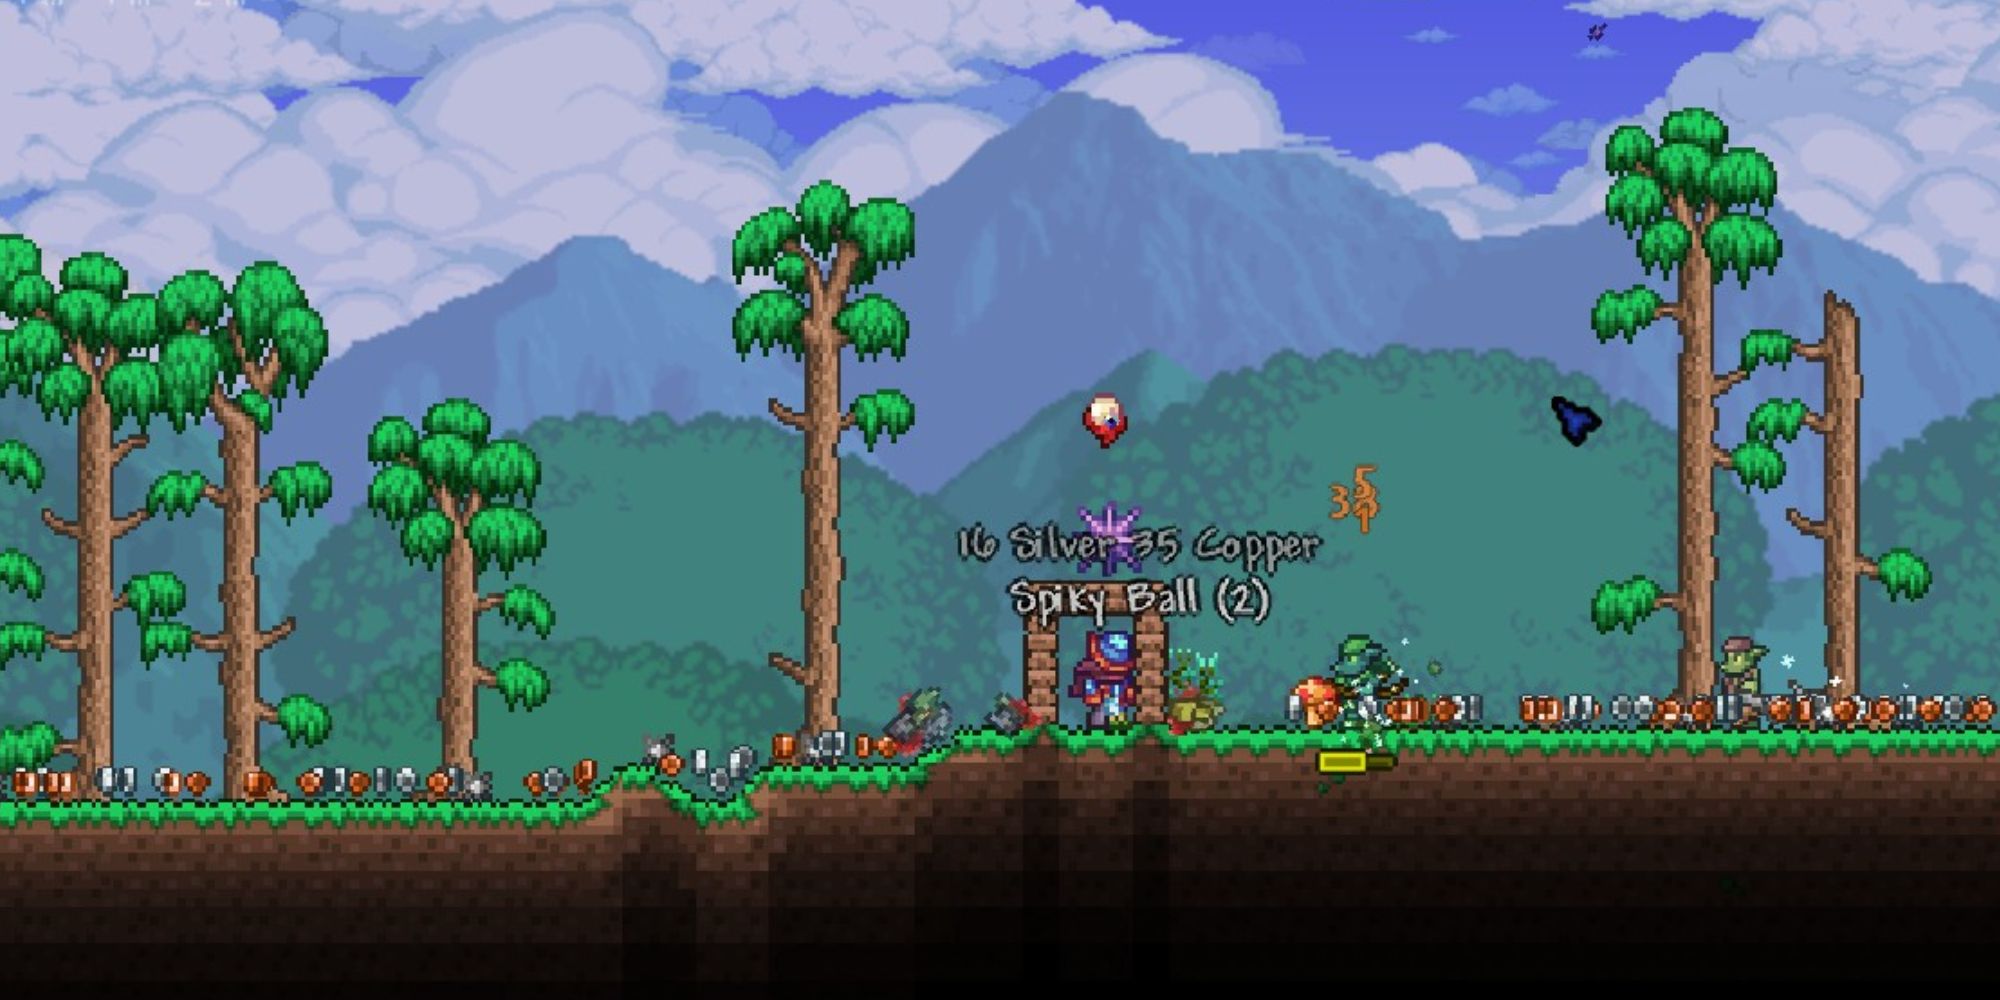 Eater of souls in terraria фото 85